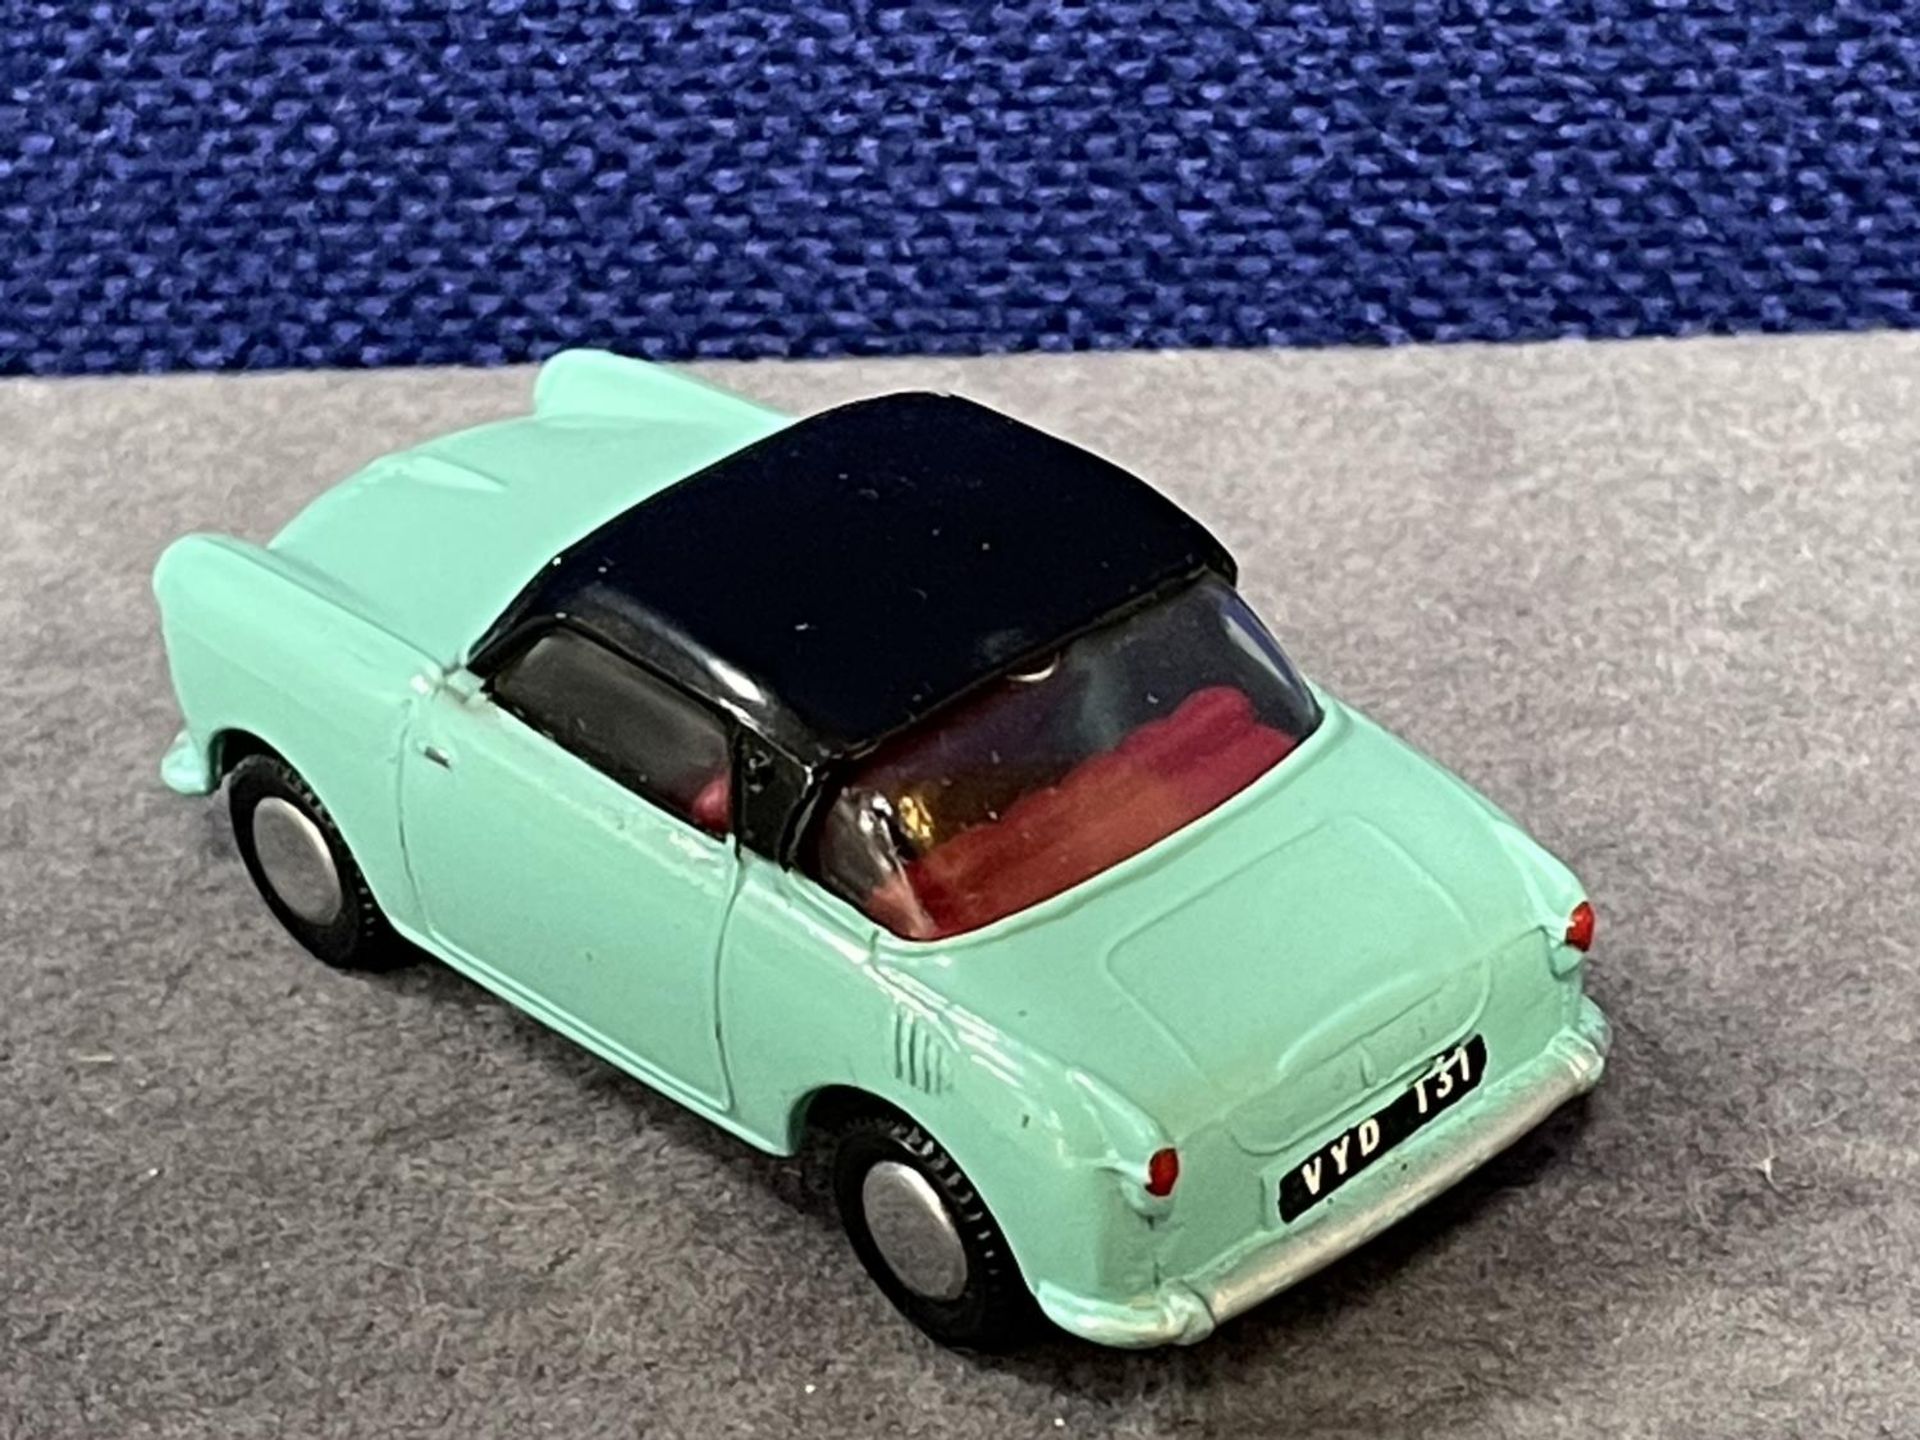 Spot-On #119 Meadows Frisky Sport Various - 1/42 Scale Aqua With Black Roof Mint Model In An - Image 3 of 5